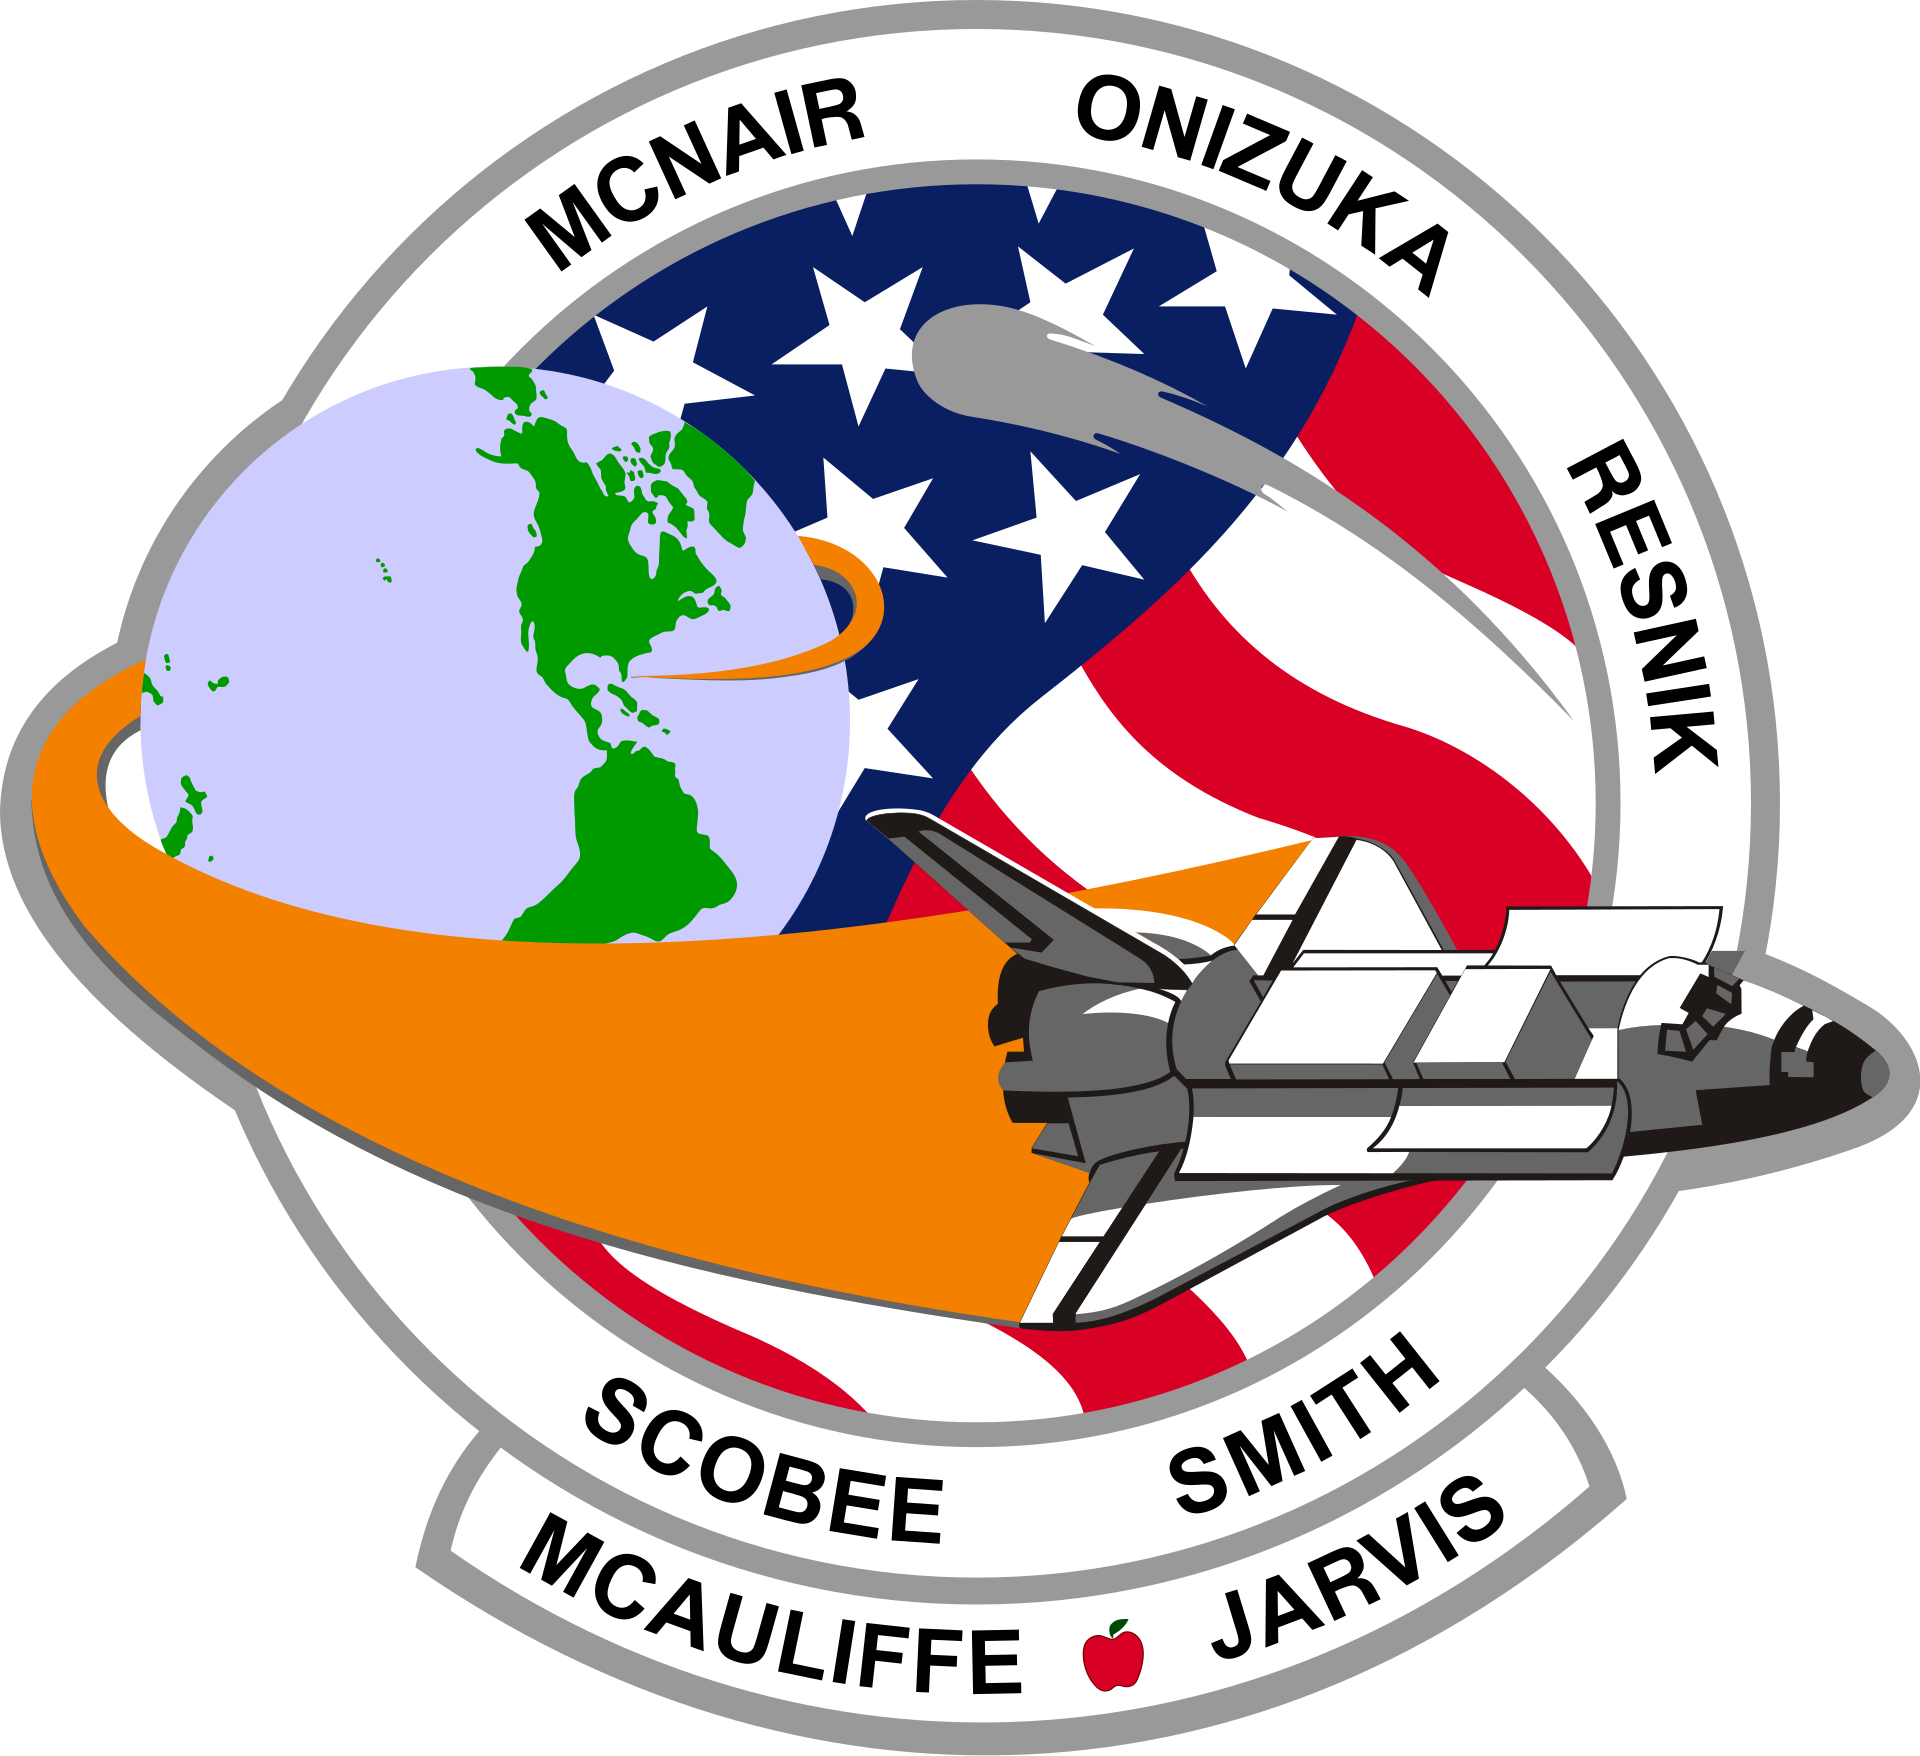 Mission patch for STS-51-L